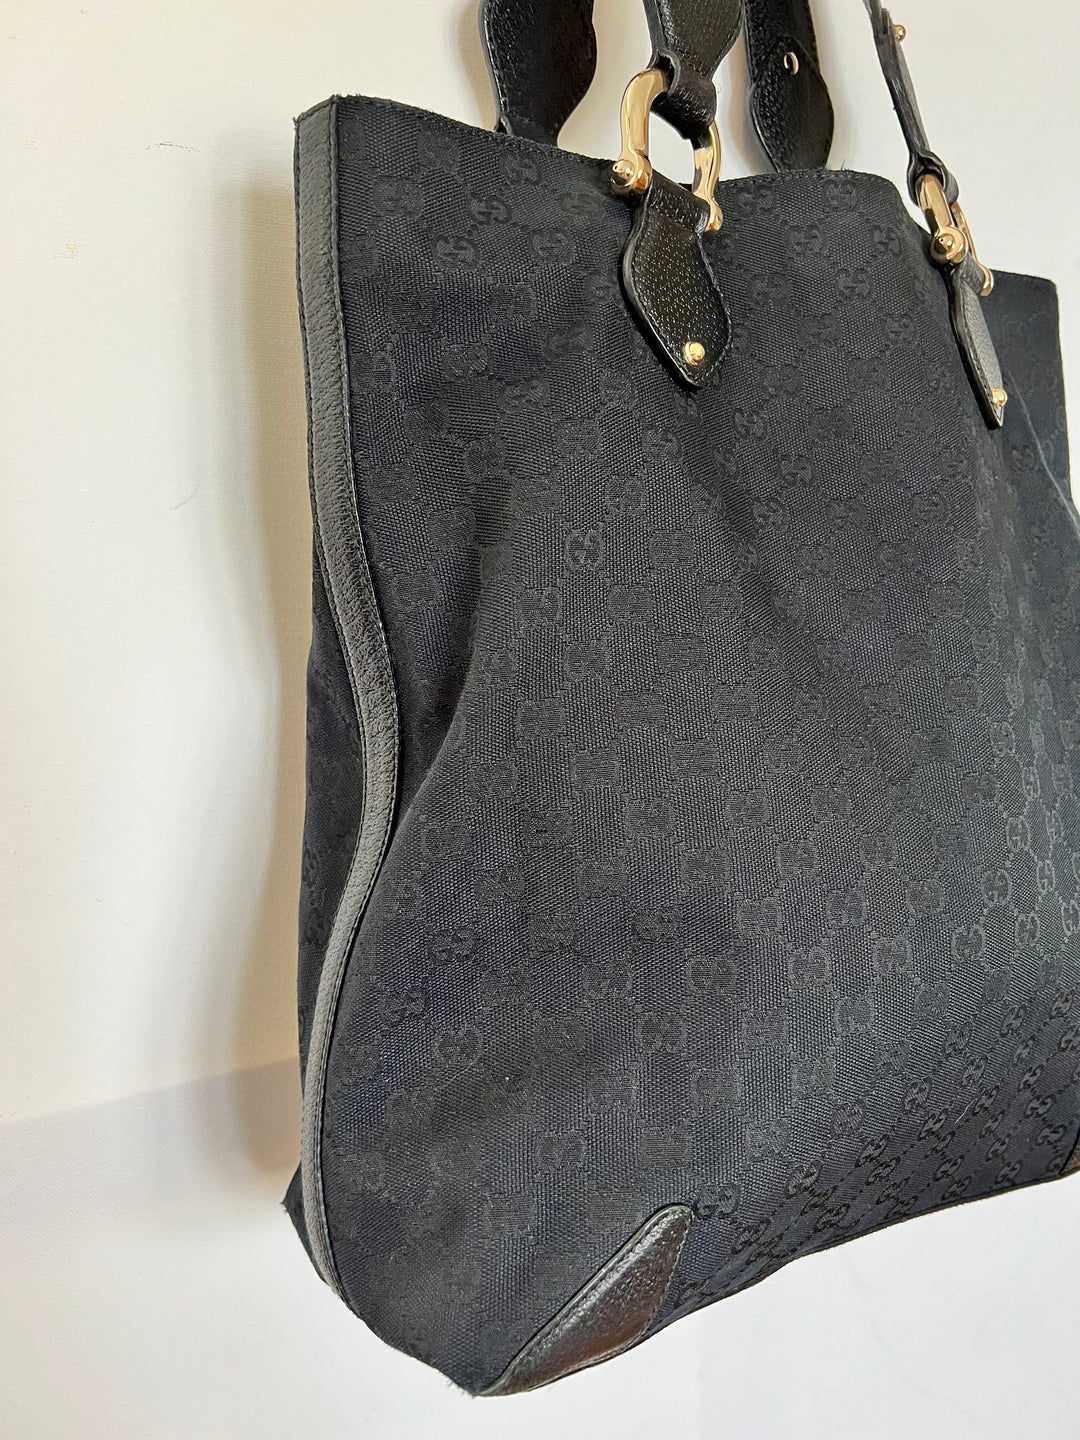 Black tote bag with GG design and black leather top handle